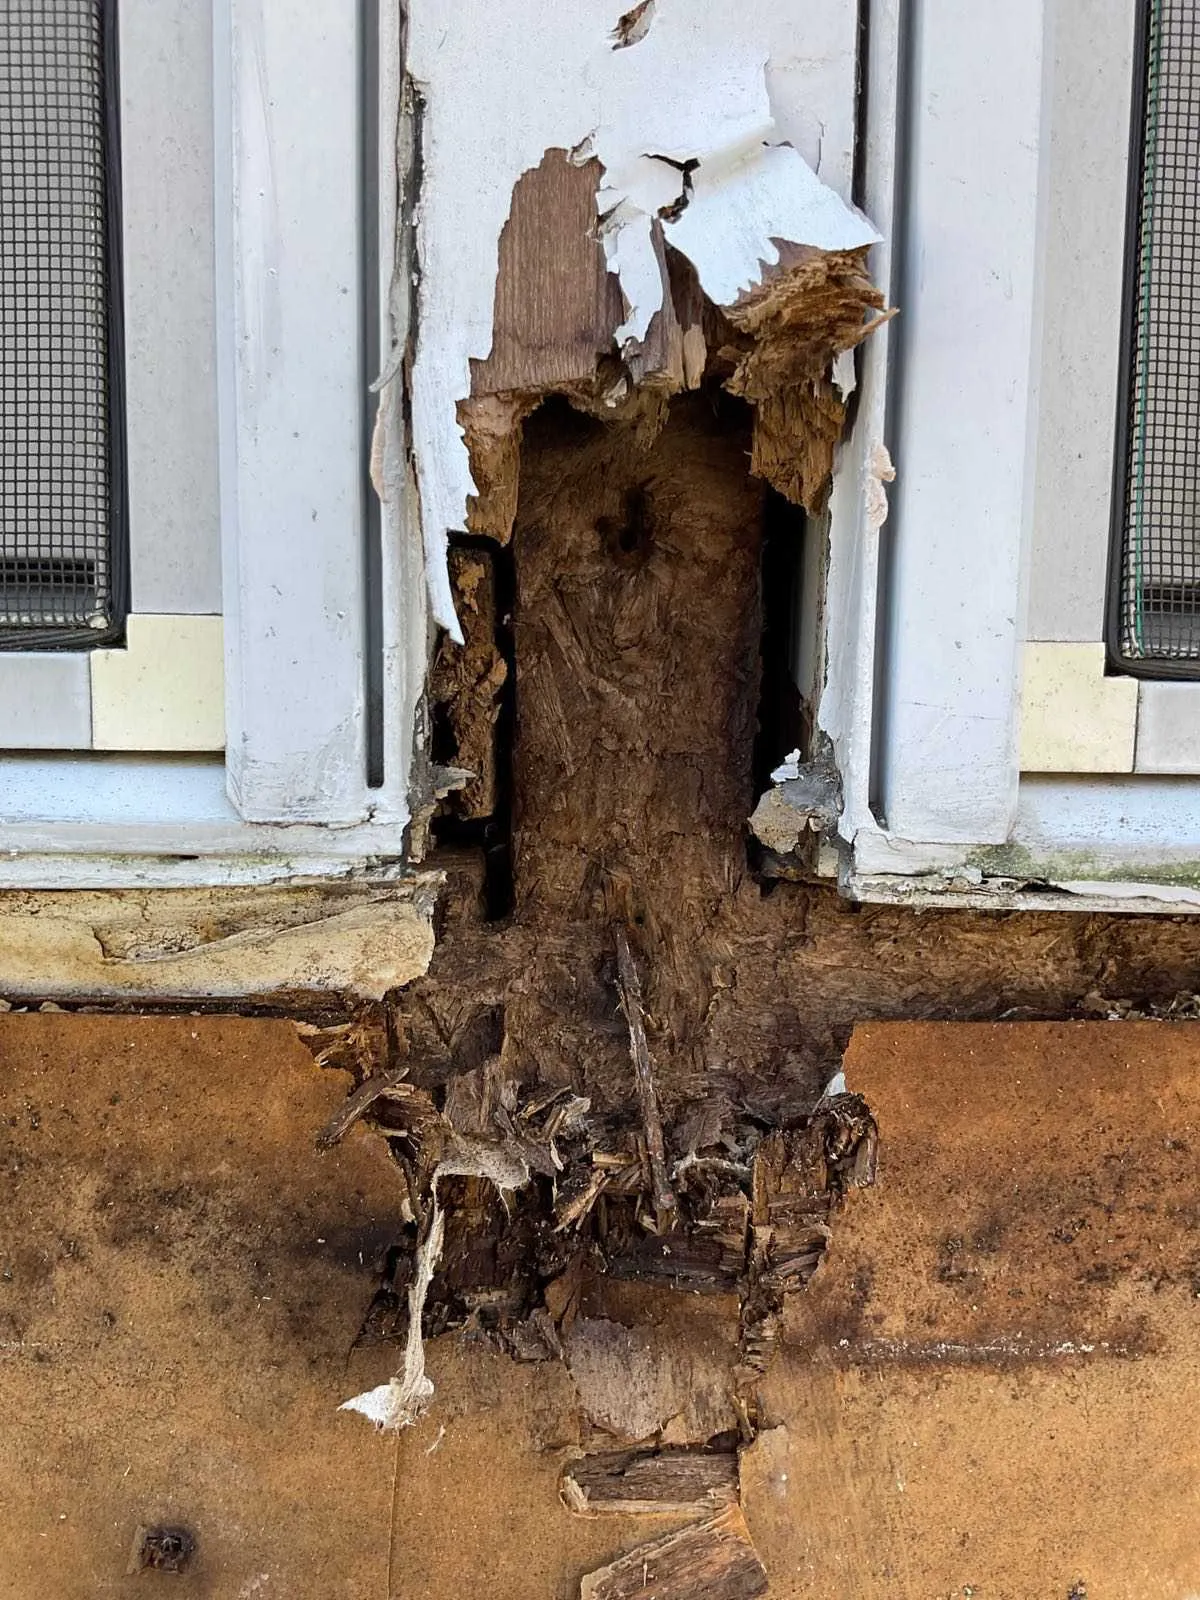 Severe wood rot on the exterior of a window frame.